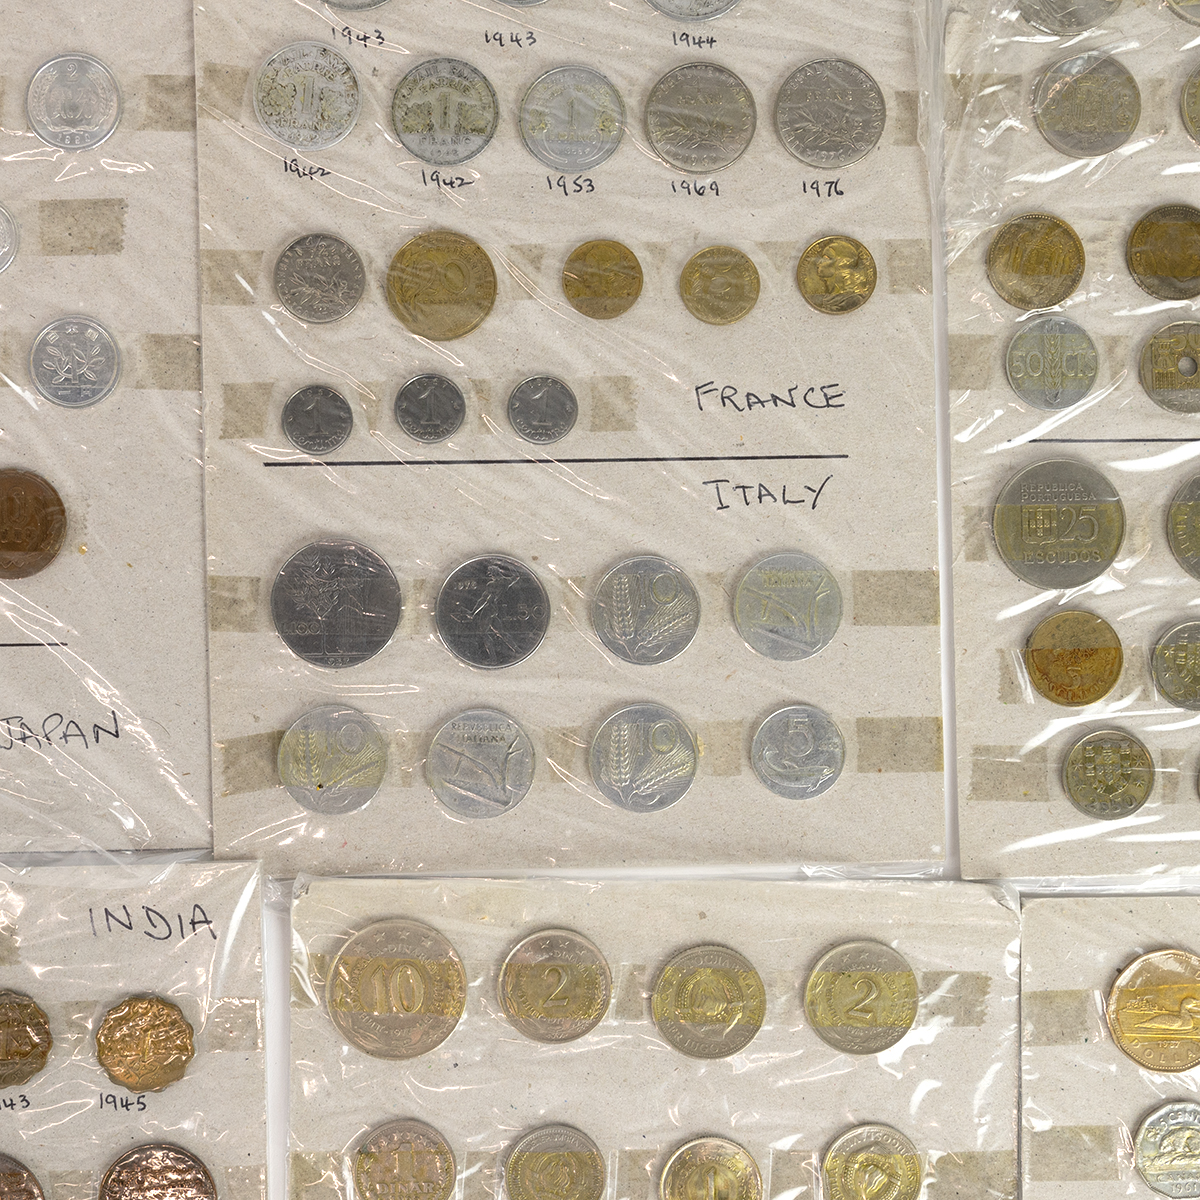 Coin and banknote collection. Folio of South American banknotes including Argentina, Bolivia and ... - Image 2 of 5